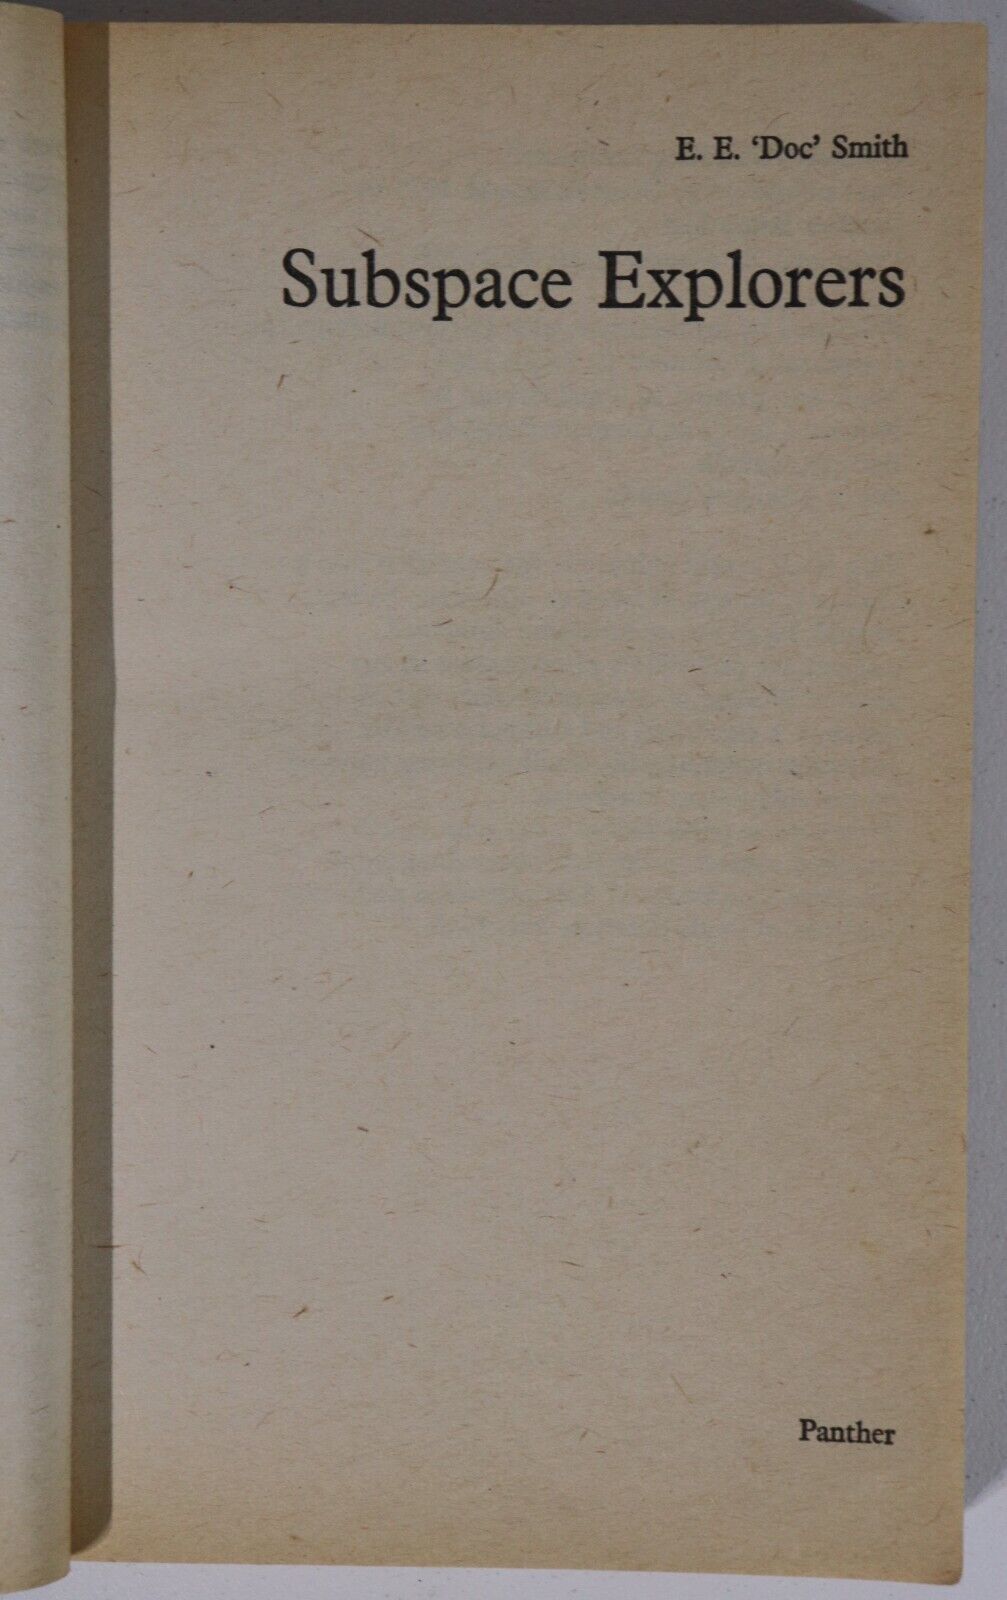 Subspace Explorers by E.E. 'Doc" Smith - 1975 - Vintage Science Fiction Book - 0